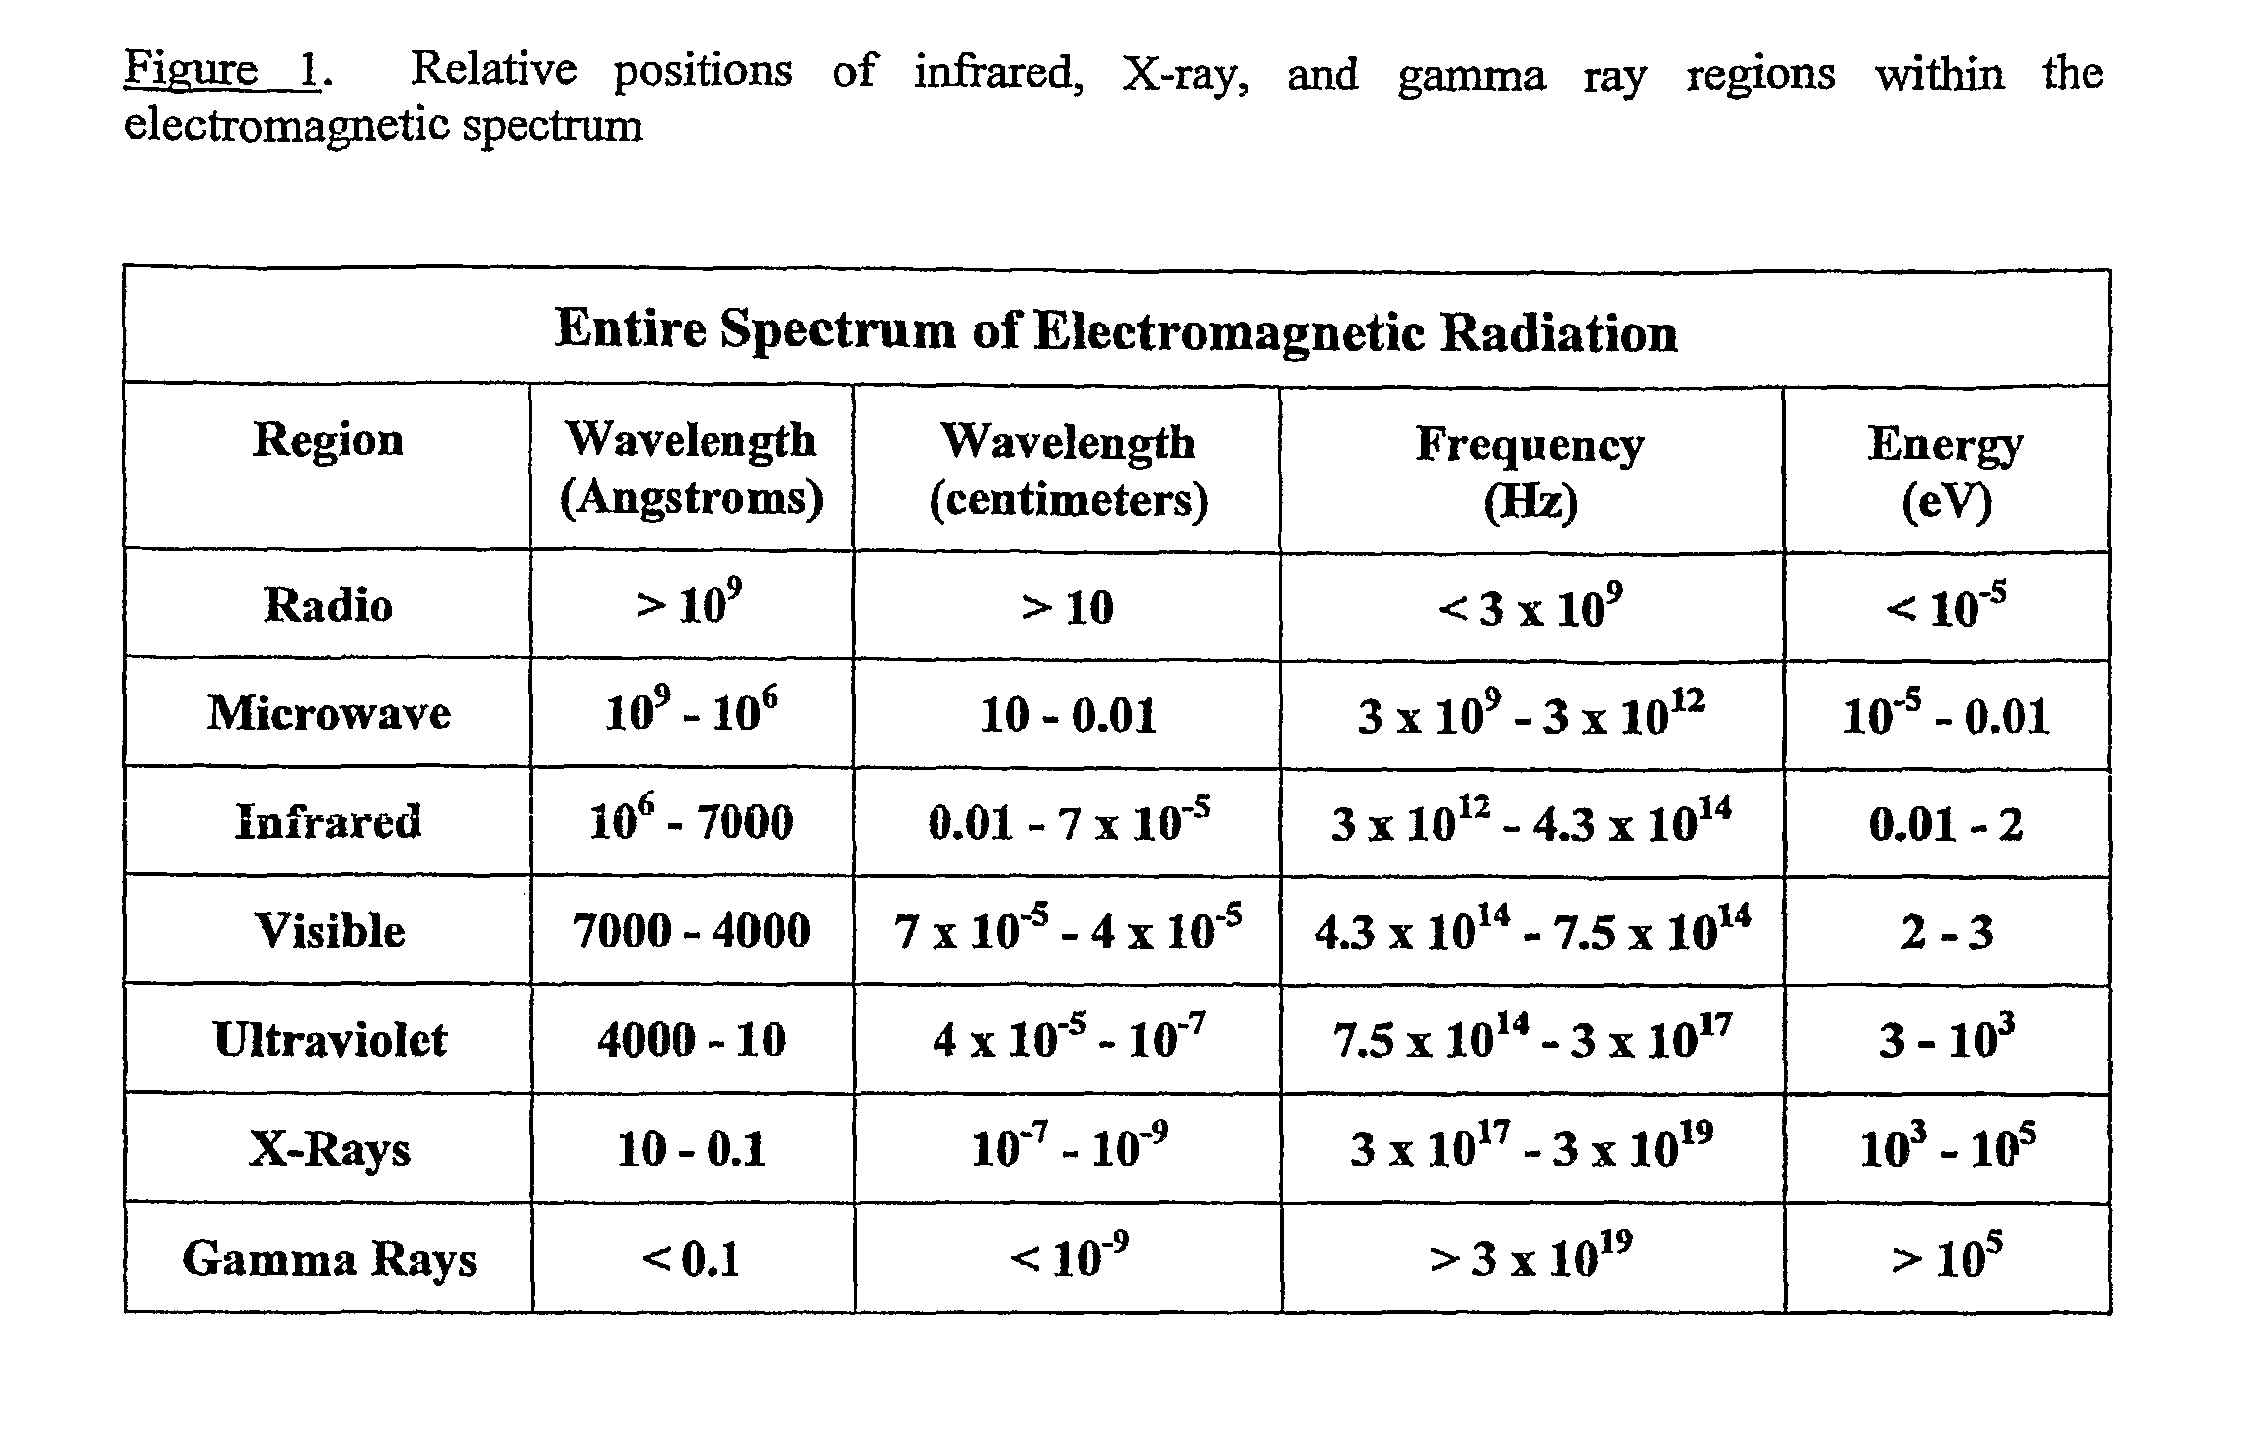 Apparatus and method for absorption of incident gamma radiation and its conversion to outgoing radiation at less penetrating, lower energies and frequencies